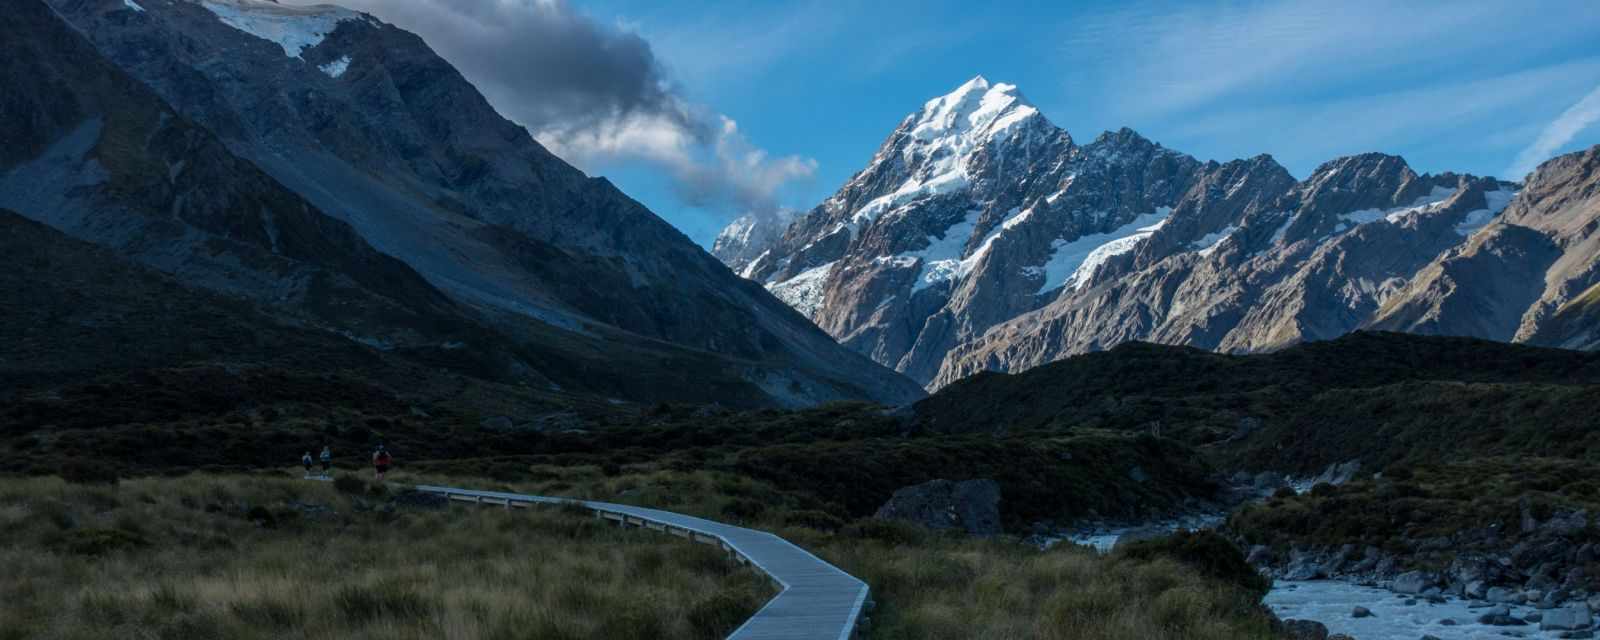 9 Tips and 5 Walks and Hikes in the Mount Cook - Aoraki National Park